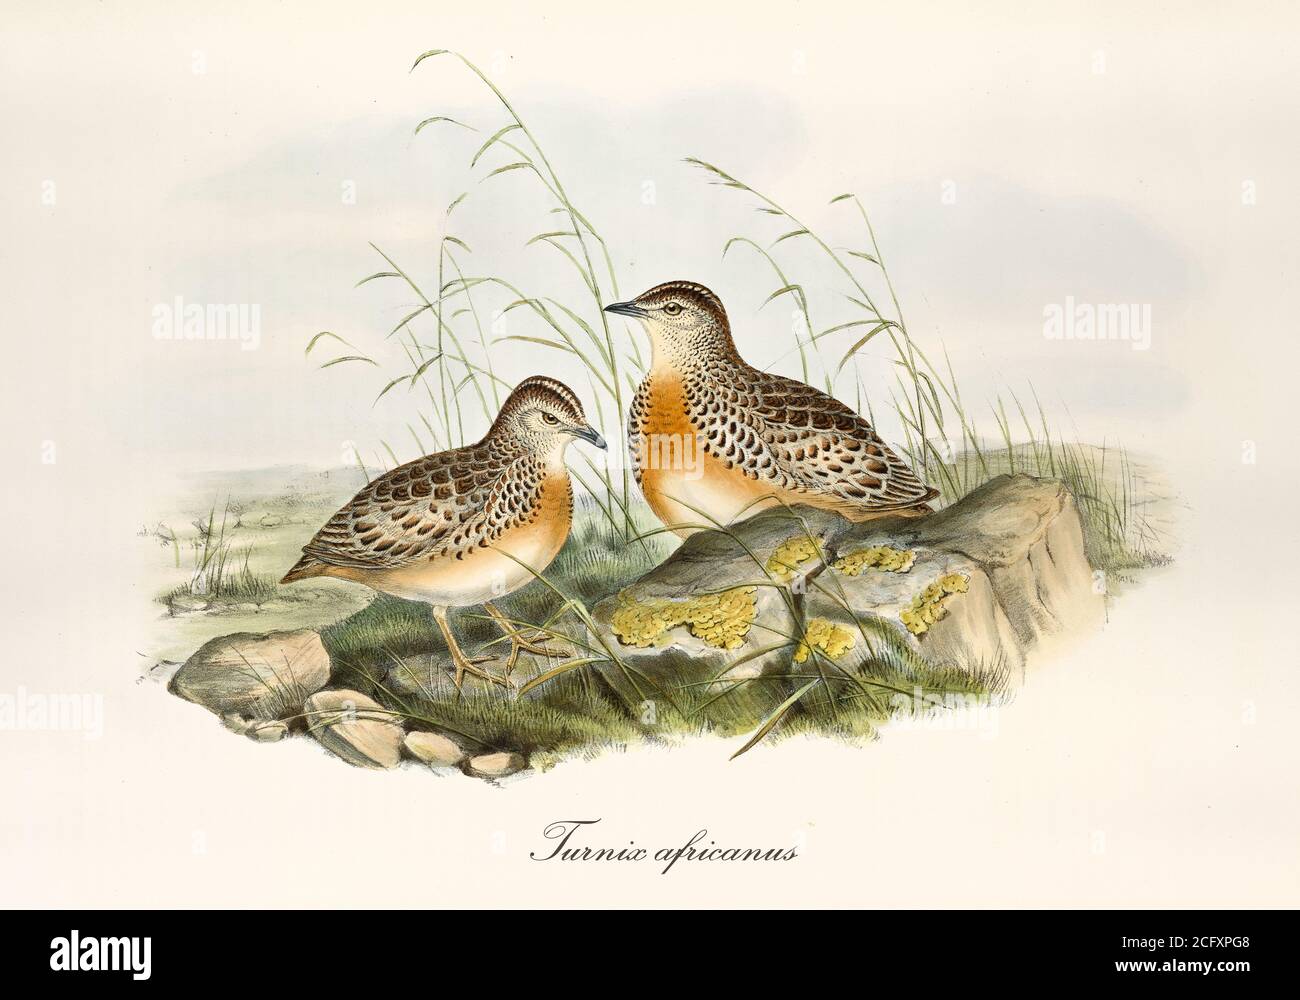 Two button quails outdoor on a rocky ground with grass. Vintage style art of Common Buttonquail (Turnix sylvaticus). By John Gould London 1862 – 1873 Stock Photo